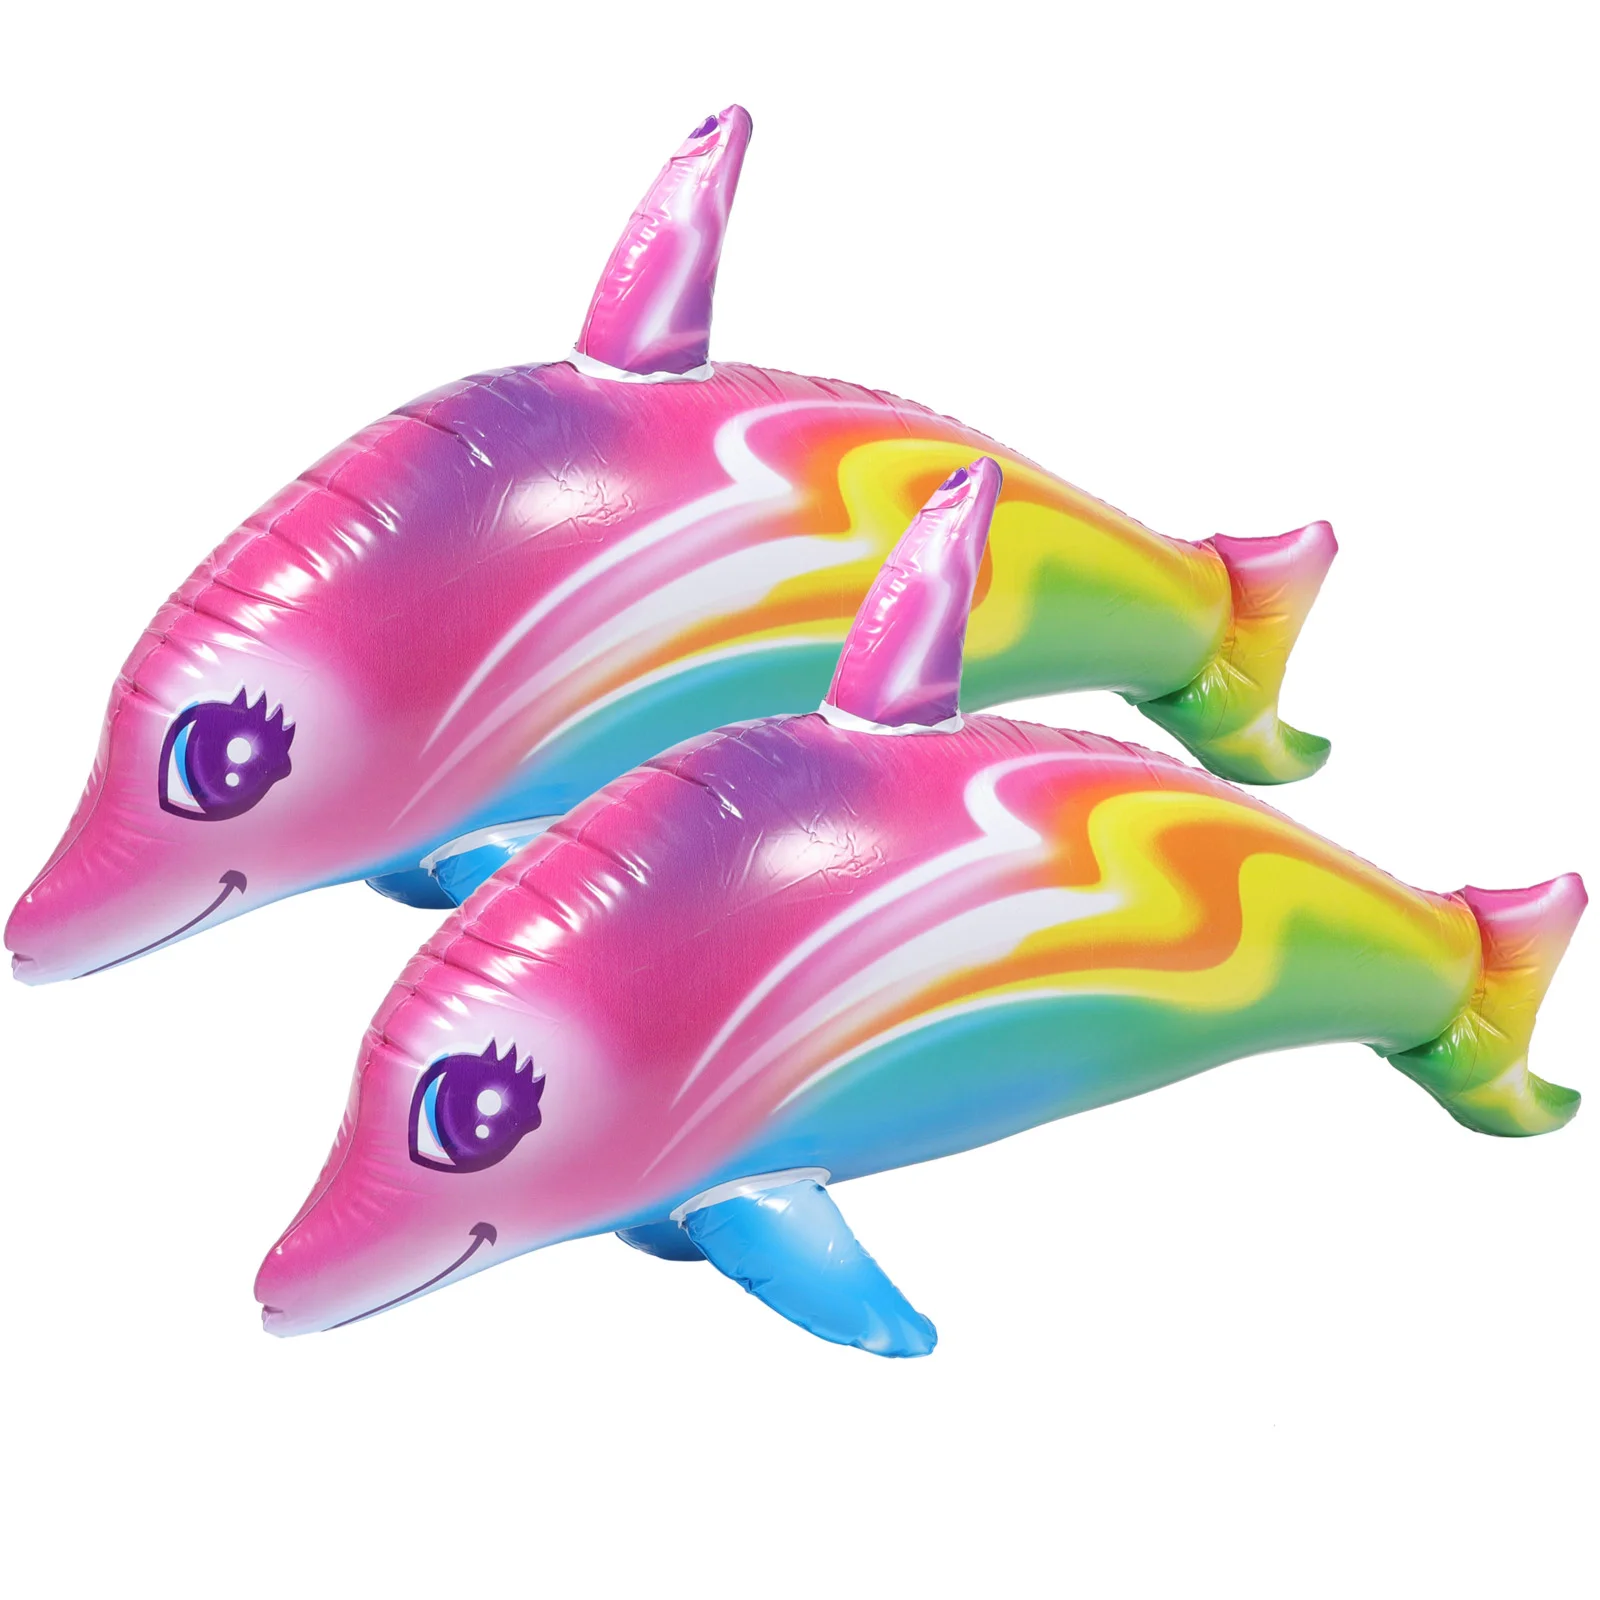 2pcs Big Inflatable Dolphin Toys Outdoor Toys for Party Games Pool Party... - $16.98